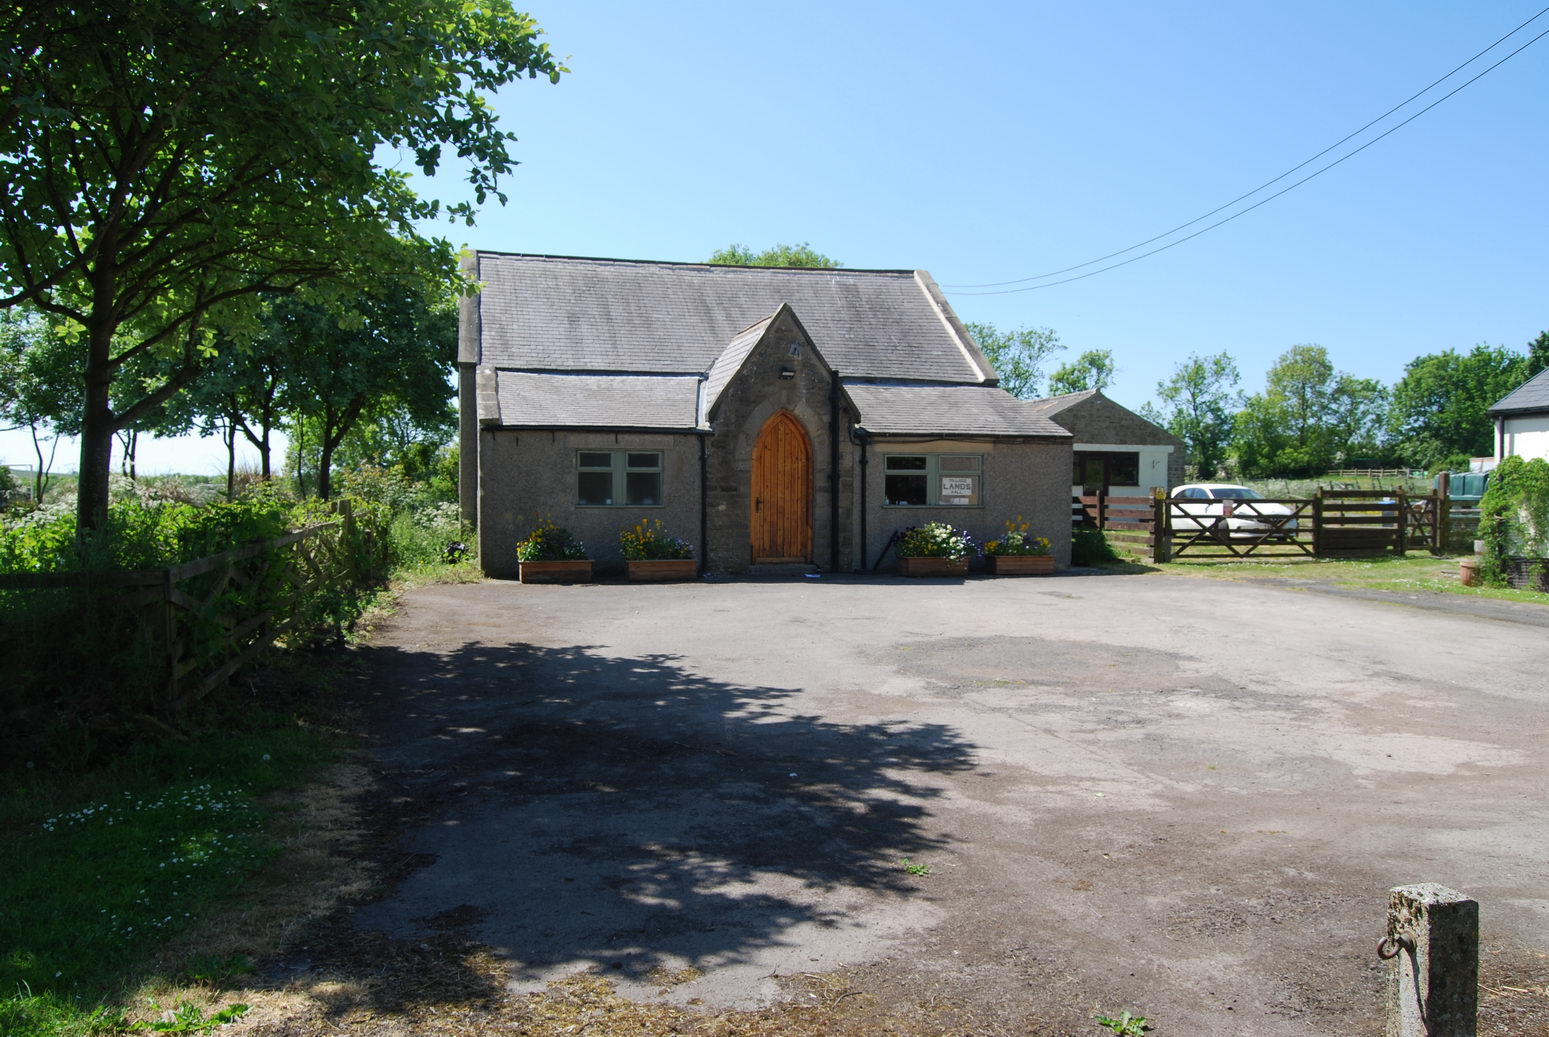 Lands Village Hall is set back from the road by its car park.